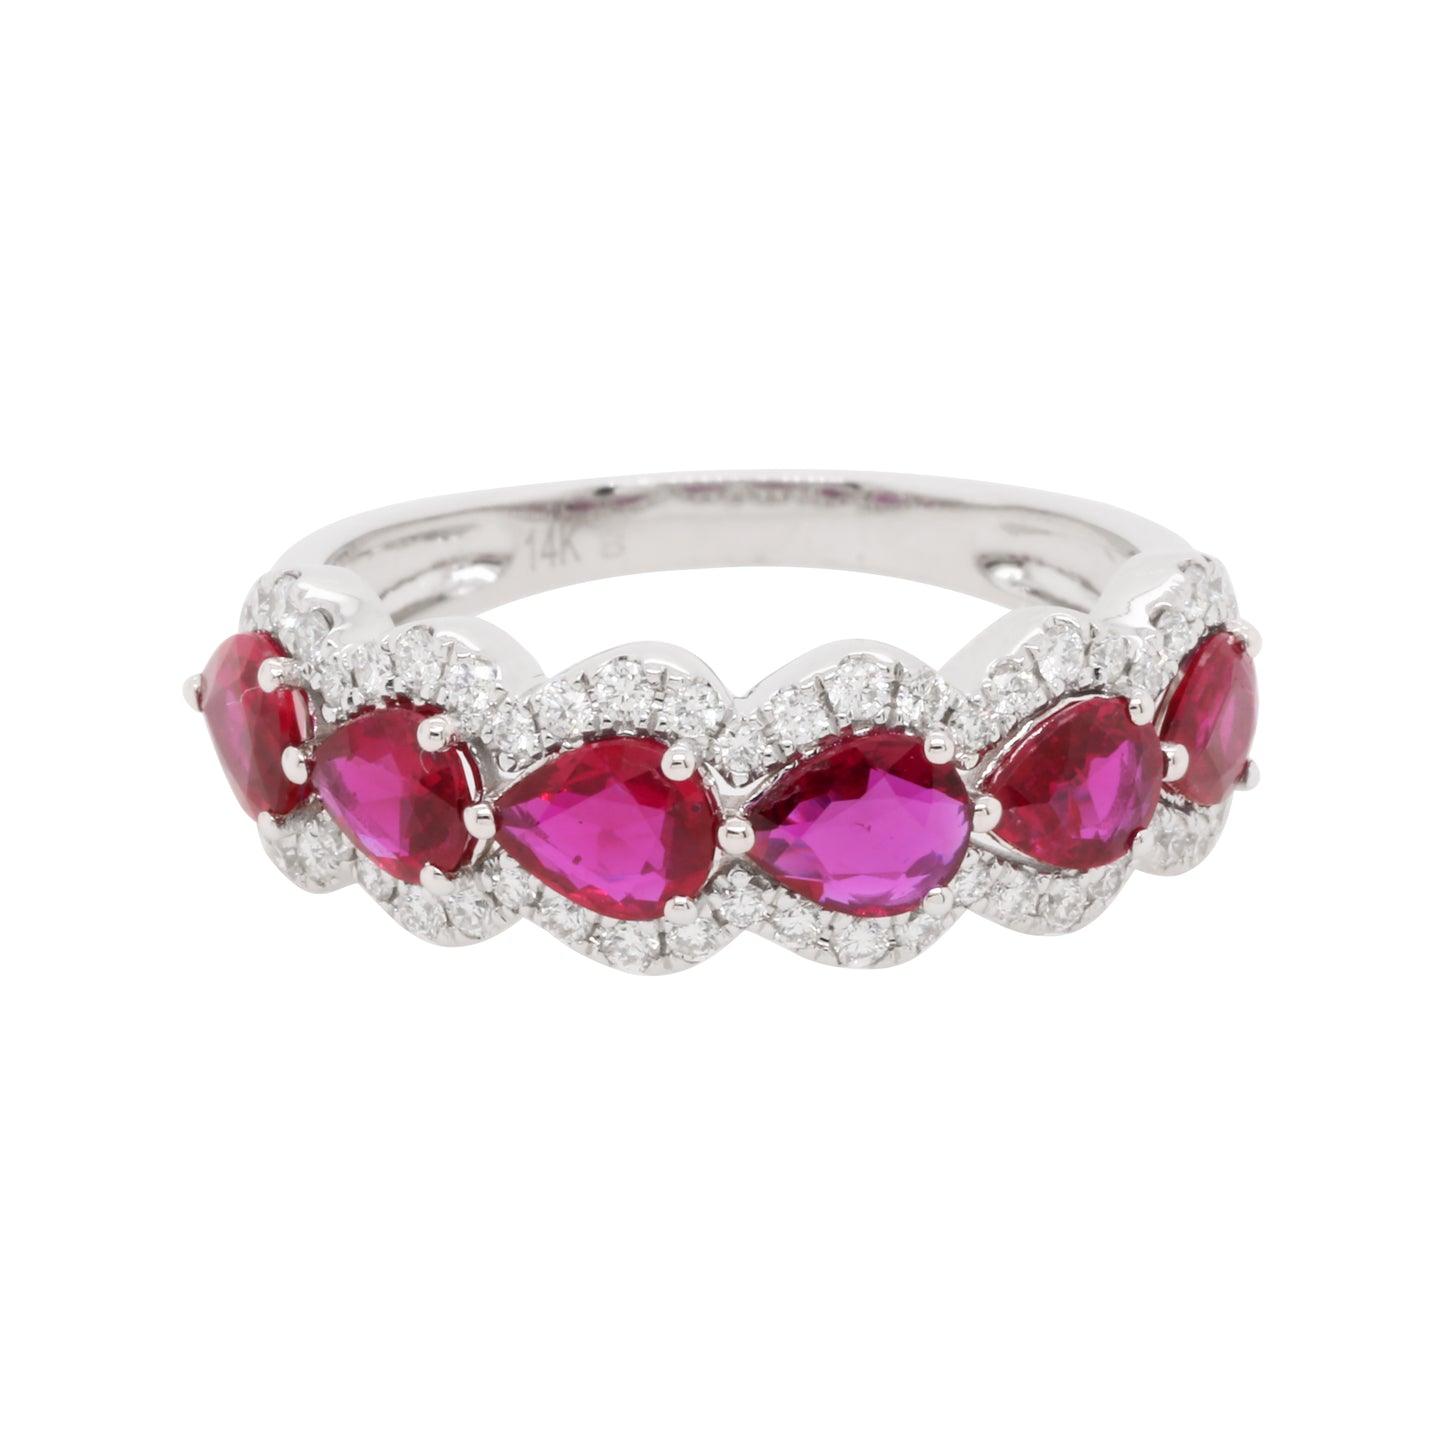 18379R - 14K Gold with Ruby and Diamonds Ring